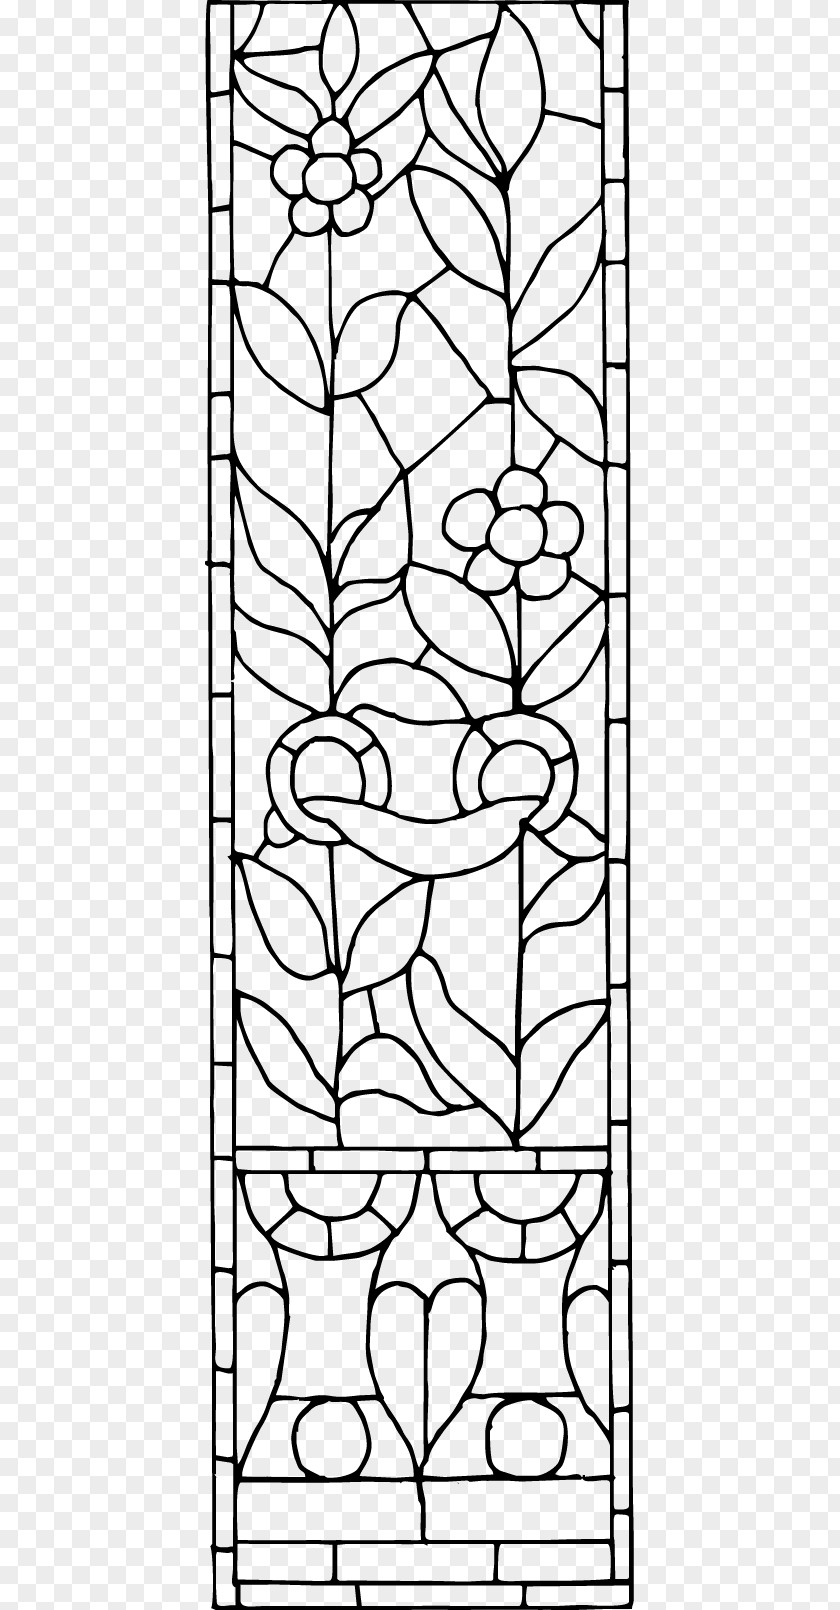 Traditional Patterns Of Black And White Windows Visual Arts Pattern PNG